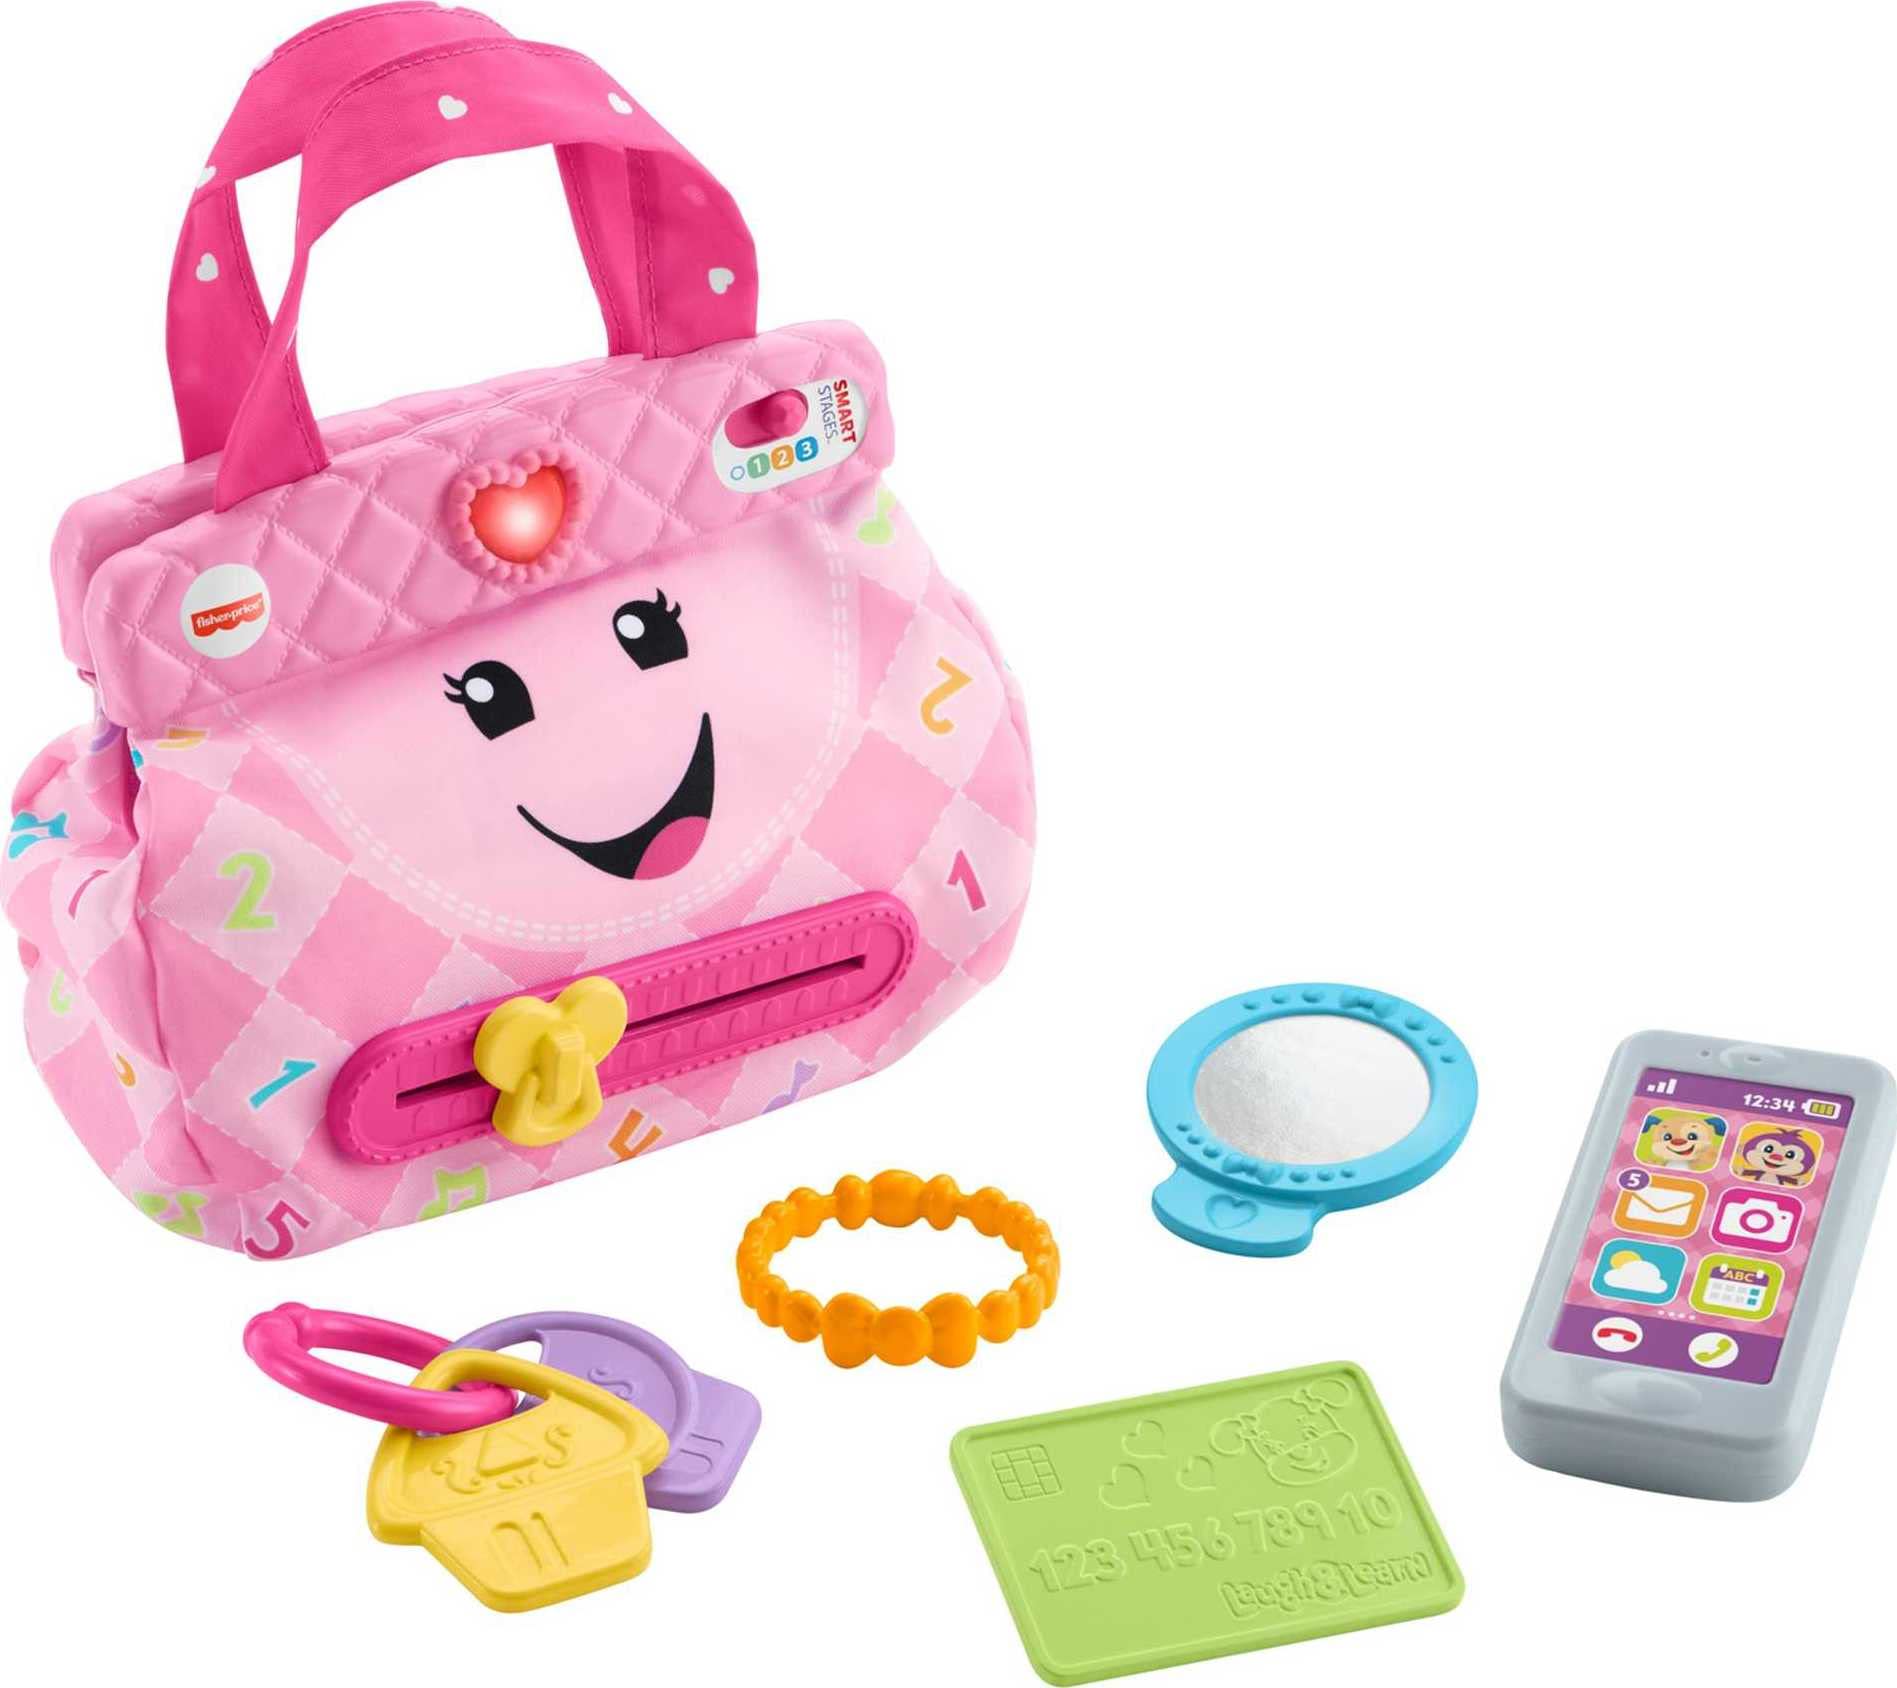 6-Piece Fisher-Price Laugh and Learn My Smart Purse Musical Baby Toy Set (Pink)  $9 + Free Shipping w/ Prime or on $35+